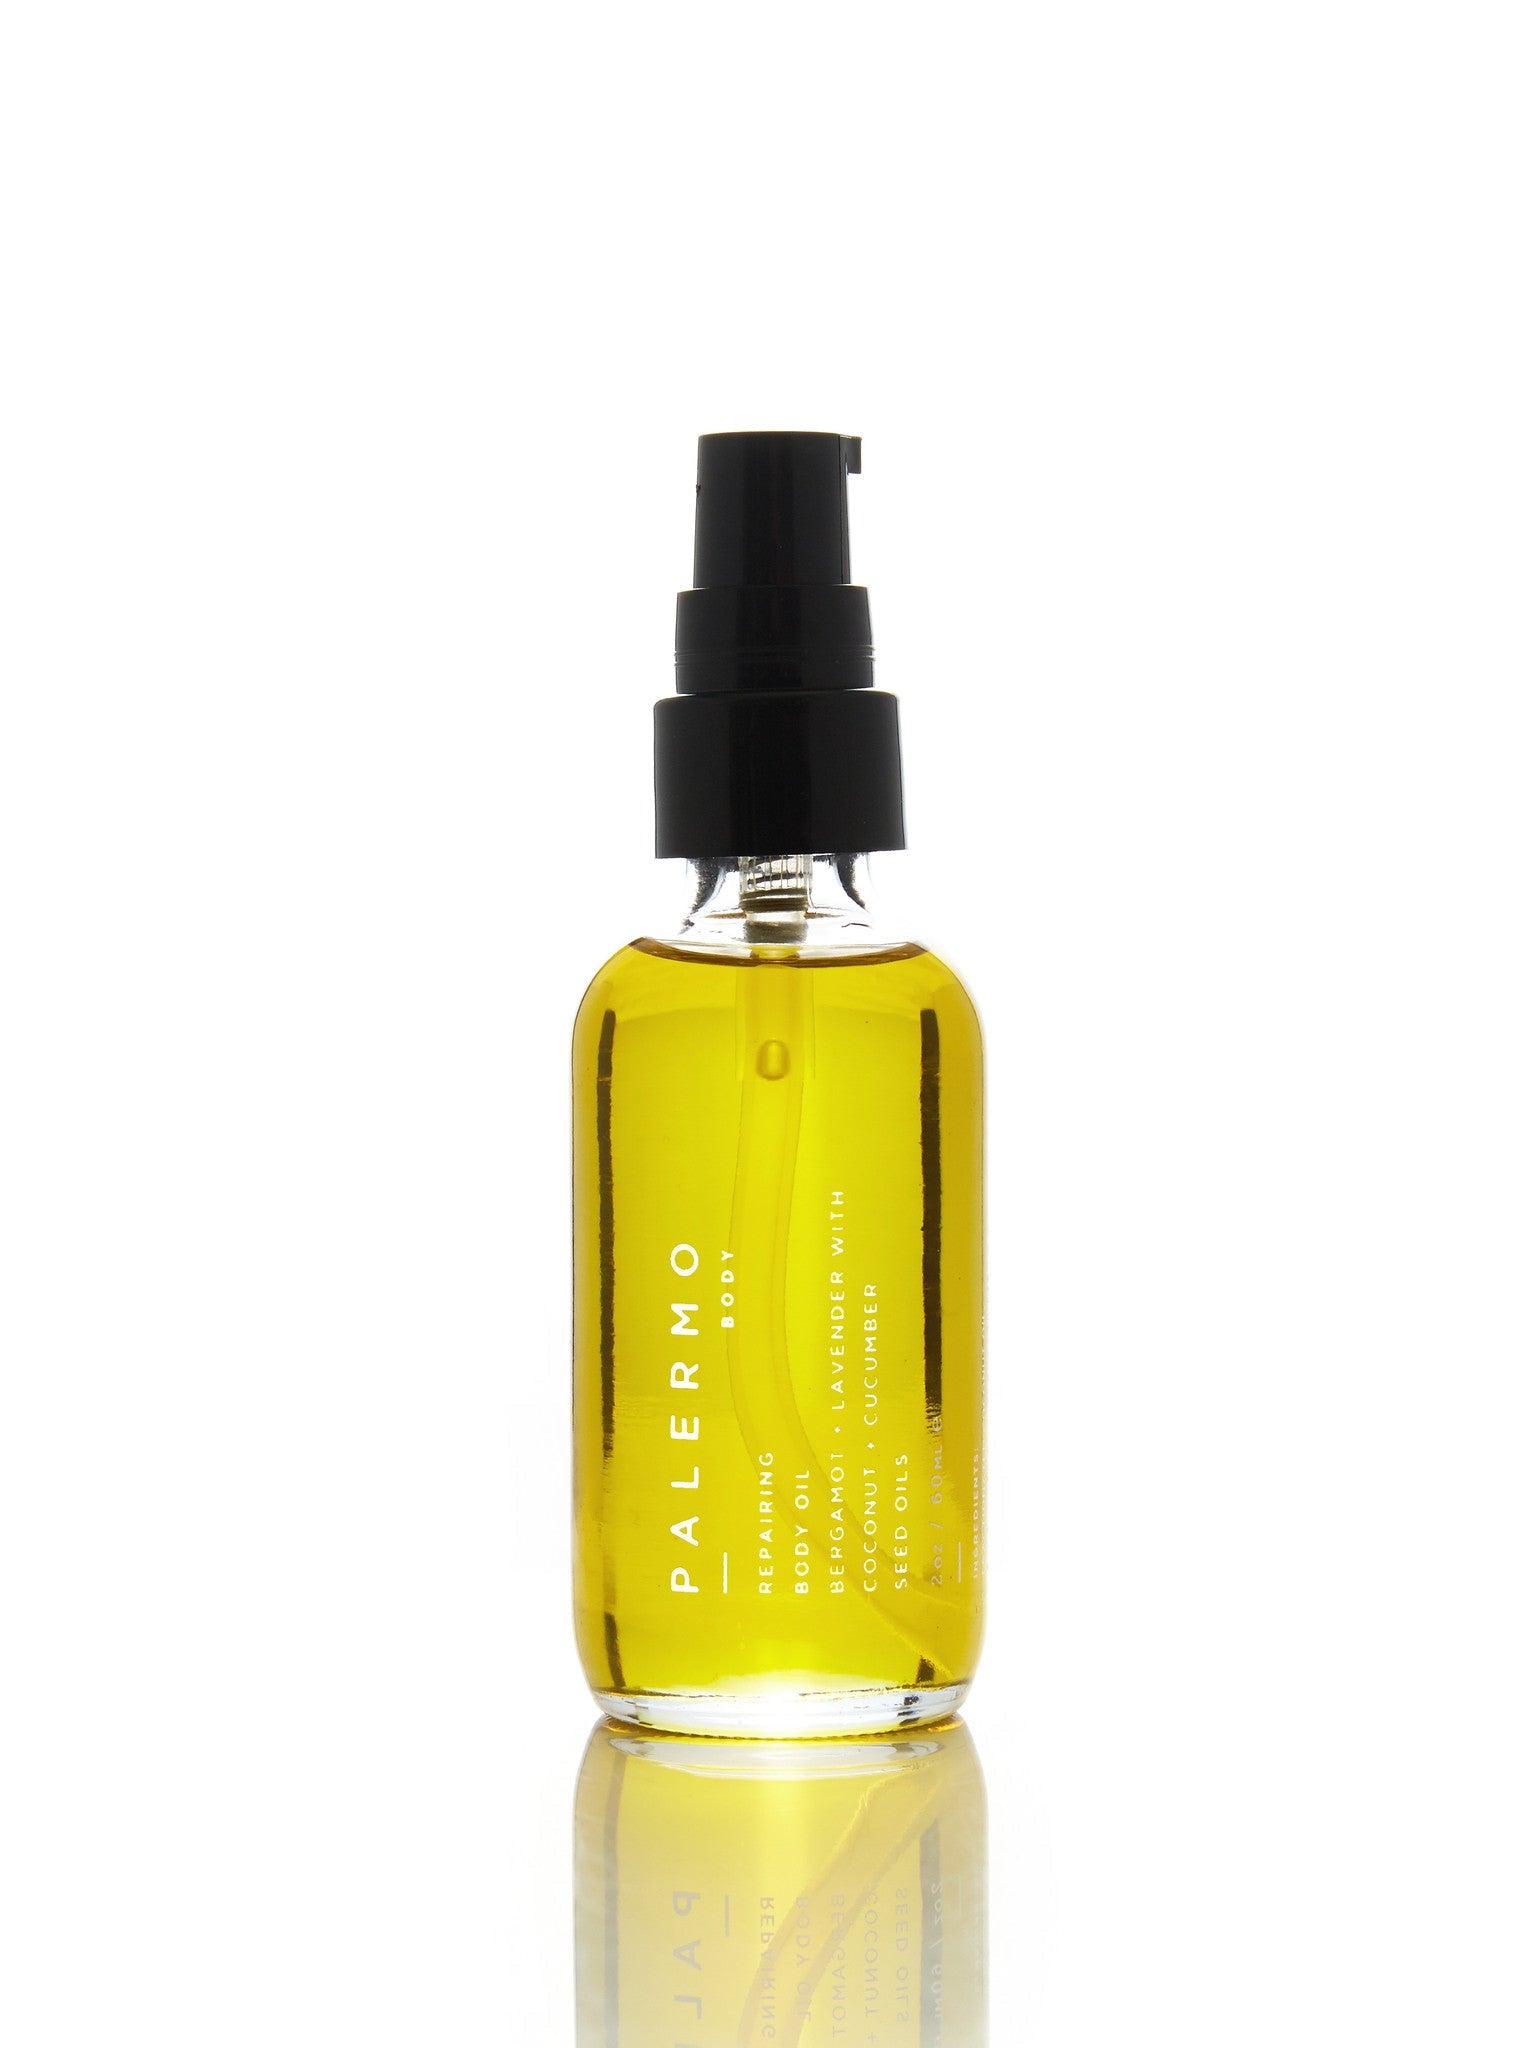 Repairing Body Oil by Palermo Body - Lotus and Willow